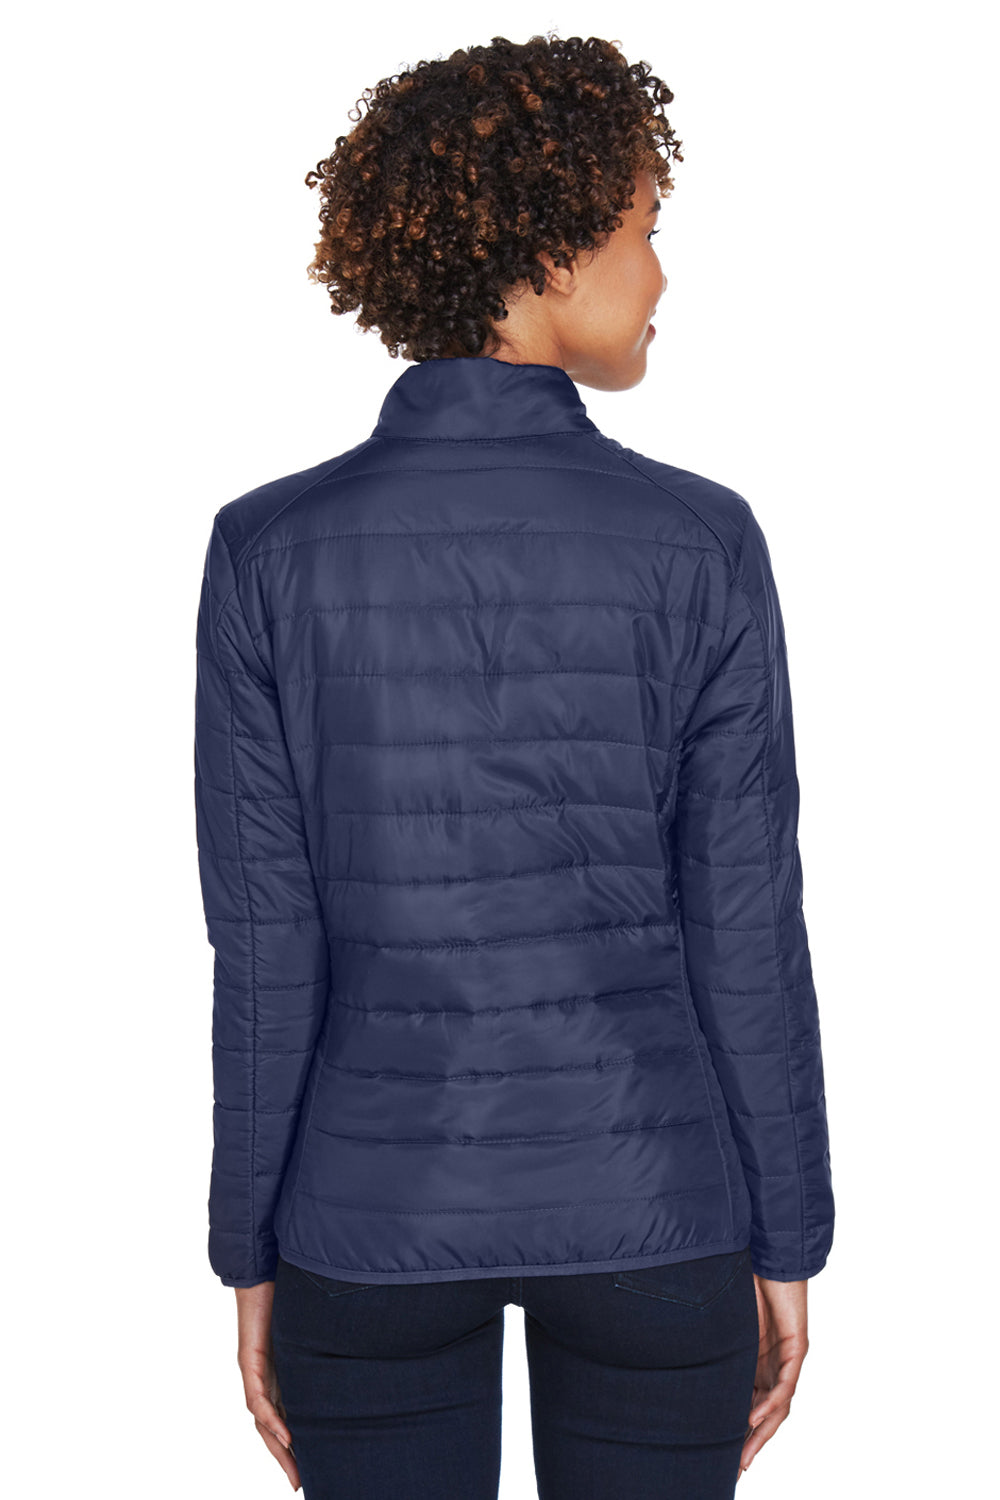 Core 365 CE700W Womens Prevail Packable Puffer Water Resistant Full Zip Jacket Navy Blue Back